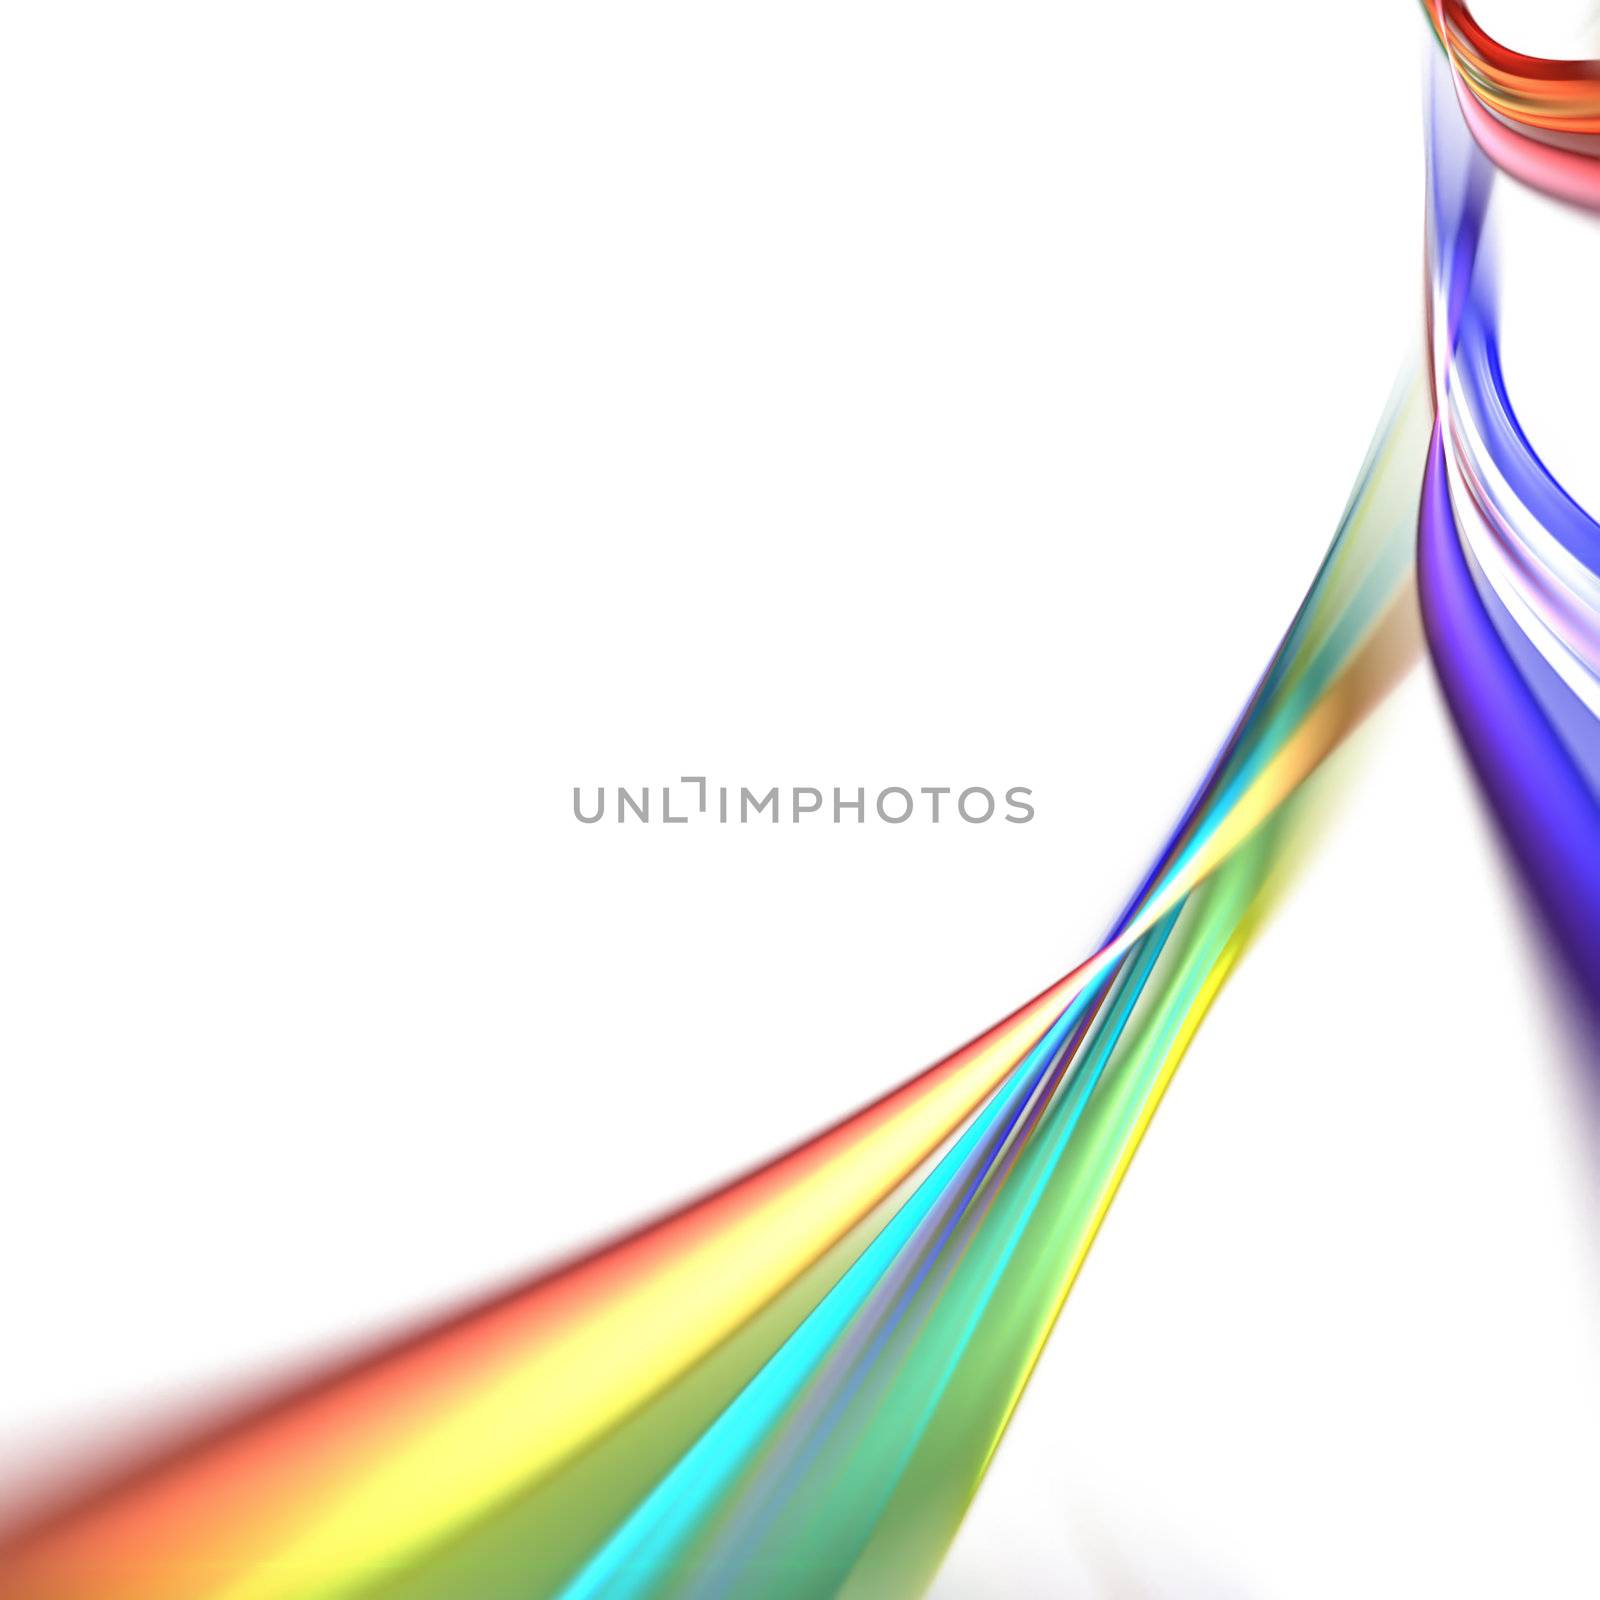 White background with streaks of colorful rainbow swooshes flowing across the layout.